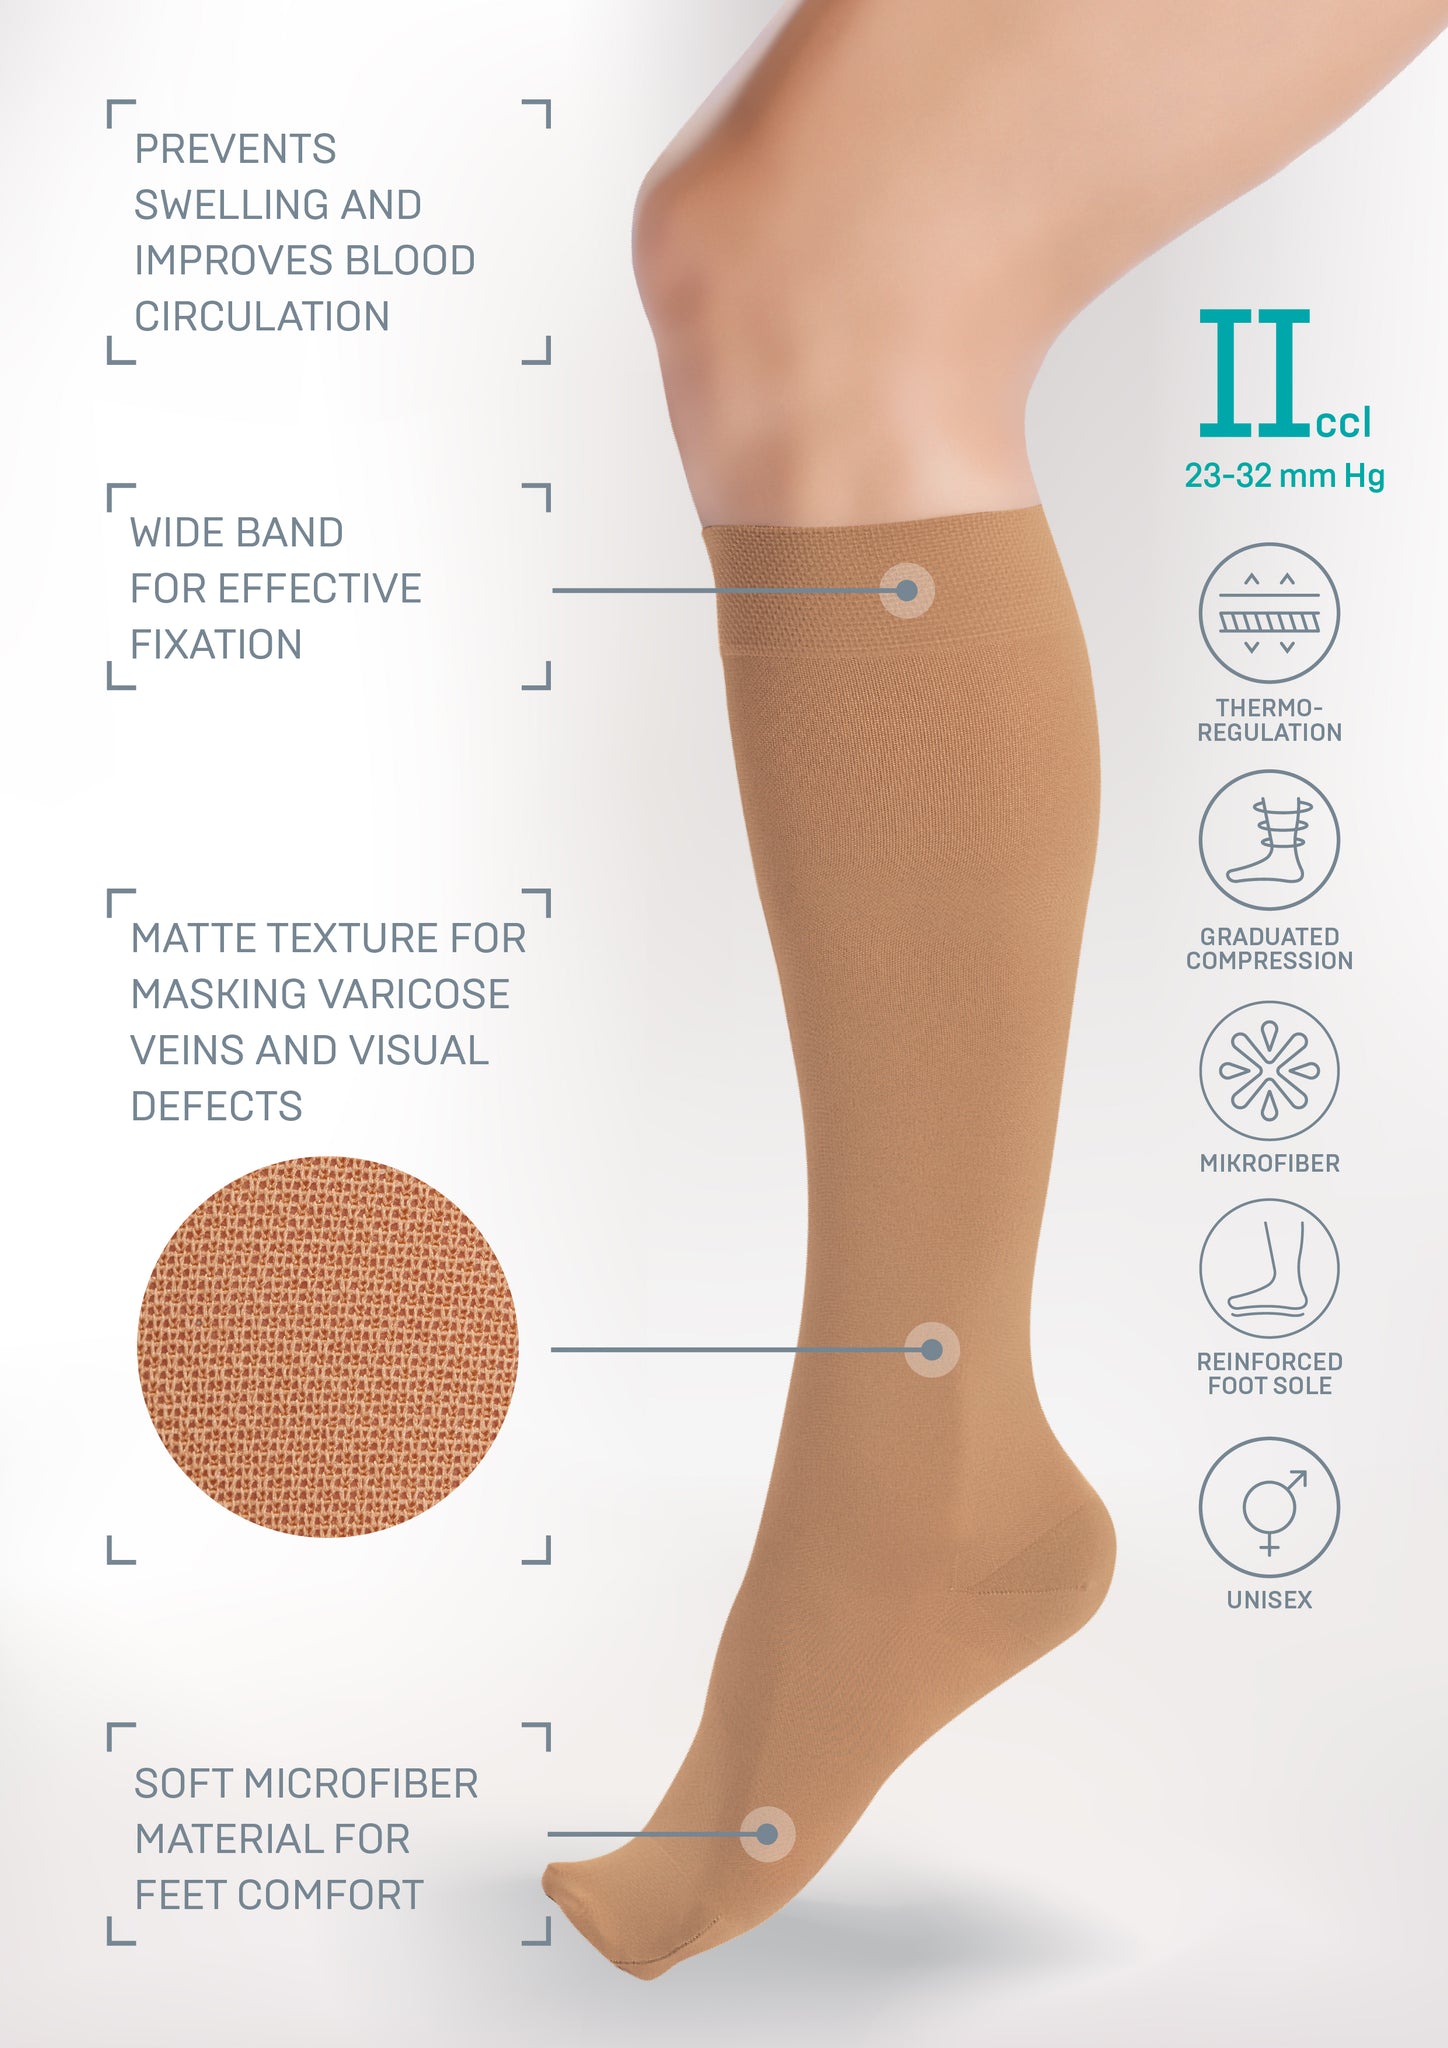 Behind Compression Stockings and Varicose Veins